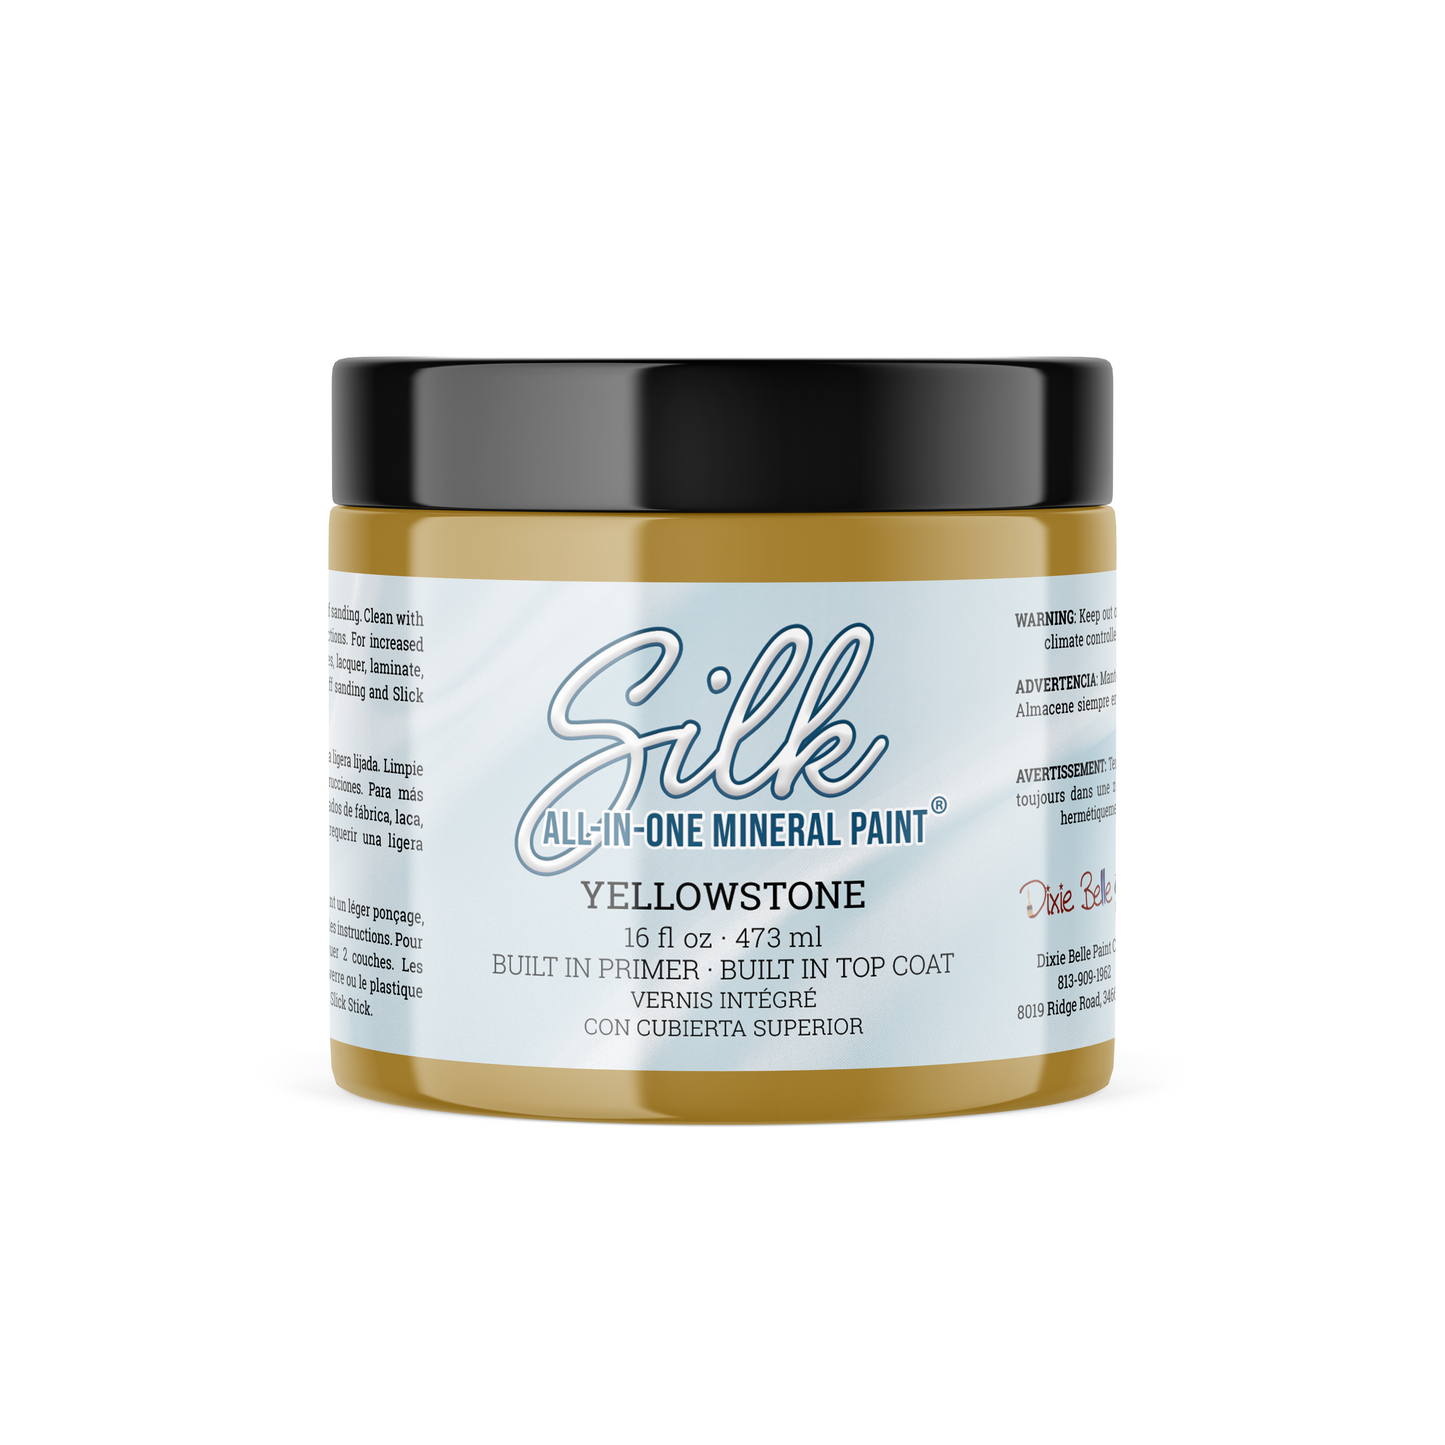 Yellowstone Silk All-in-One Mineral Paint